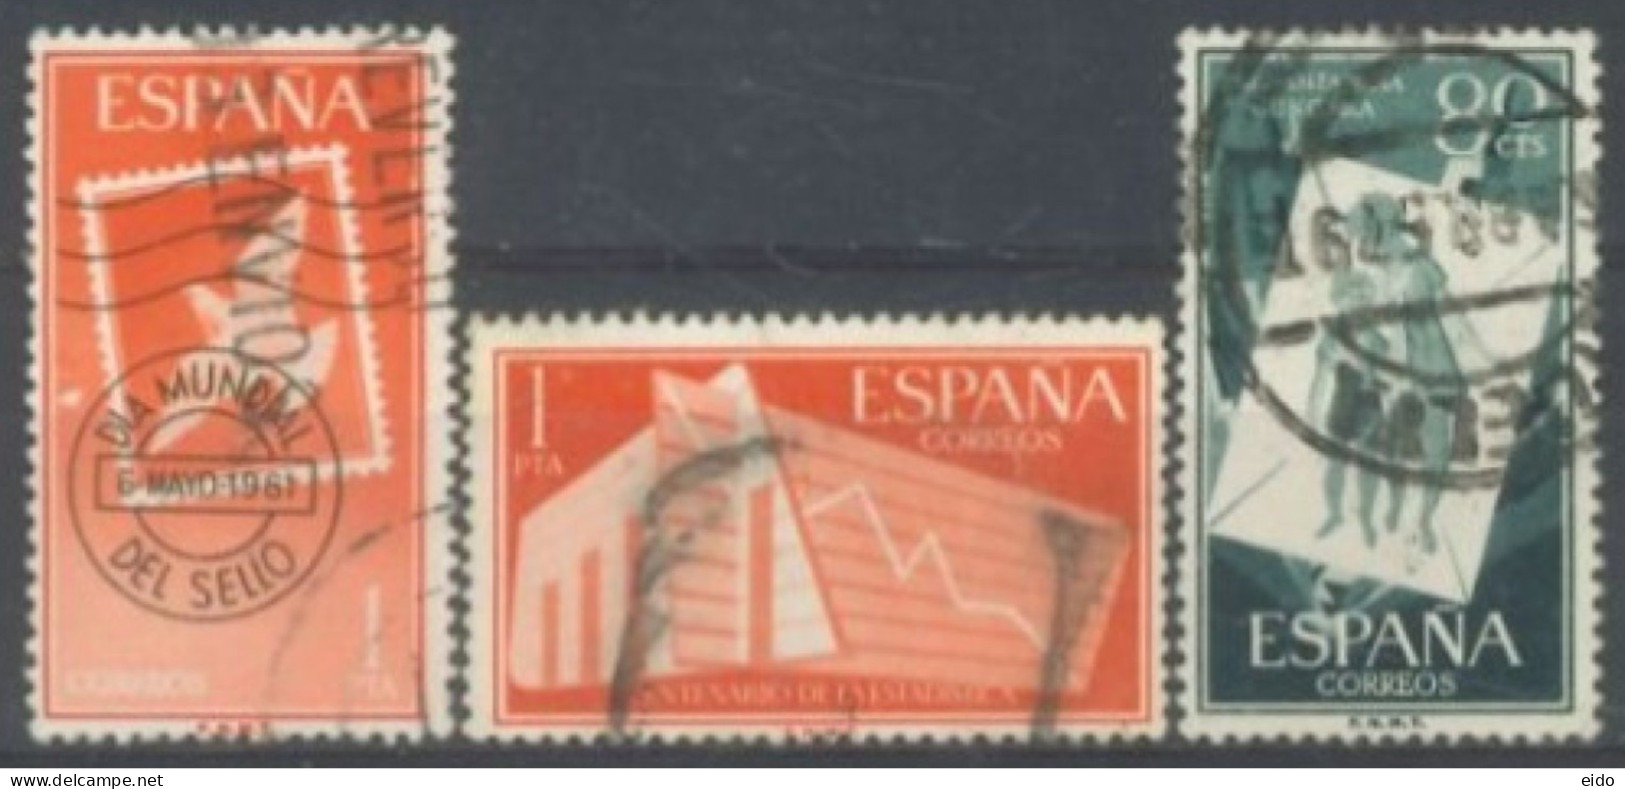 SPAIN, 1956/61, HUNGARIAN CHILDREN, CANCELED STAMP & STATISTICAL SET OF 3, # 855,860, & 988, USED. - Gebraucht